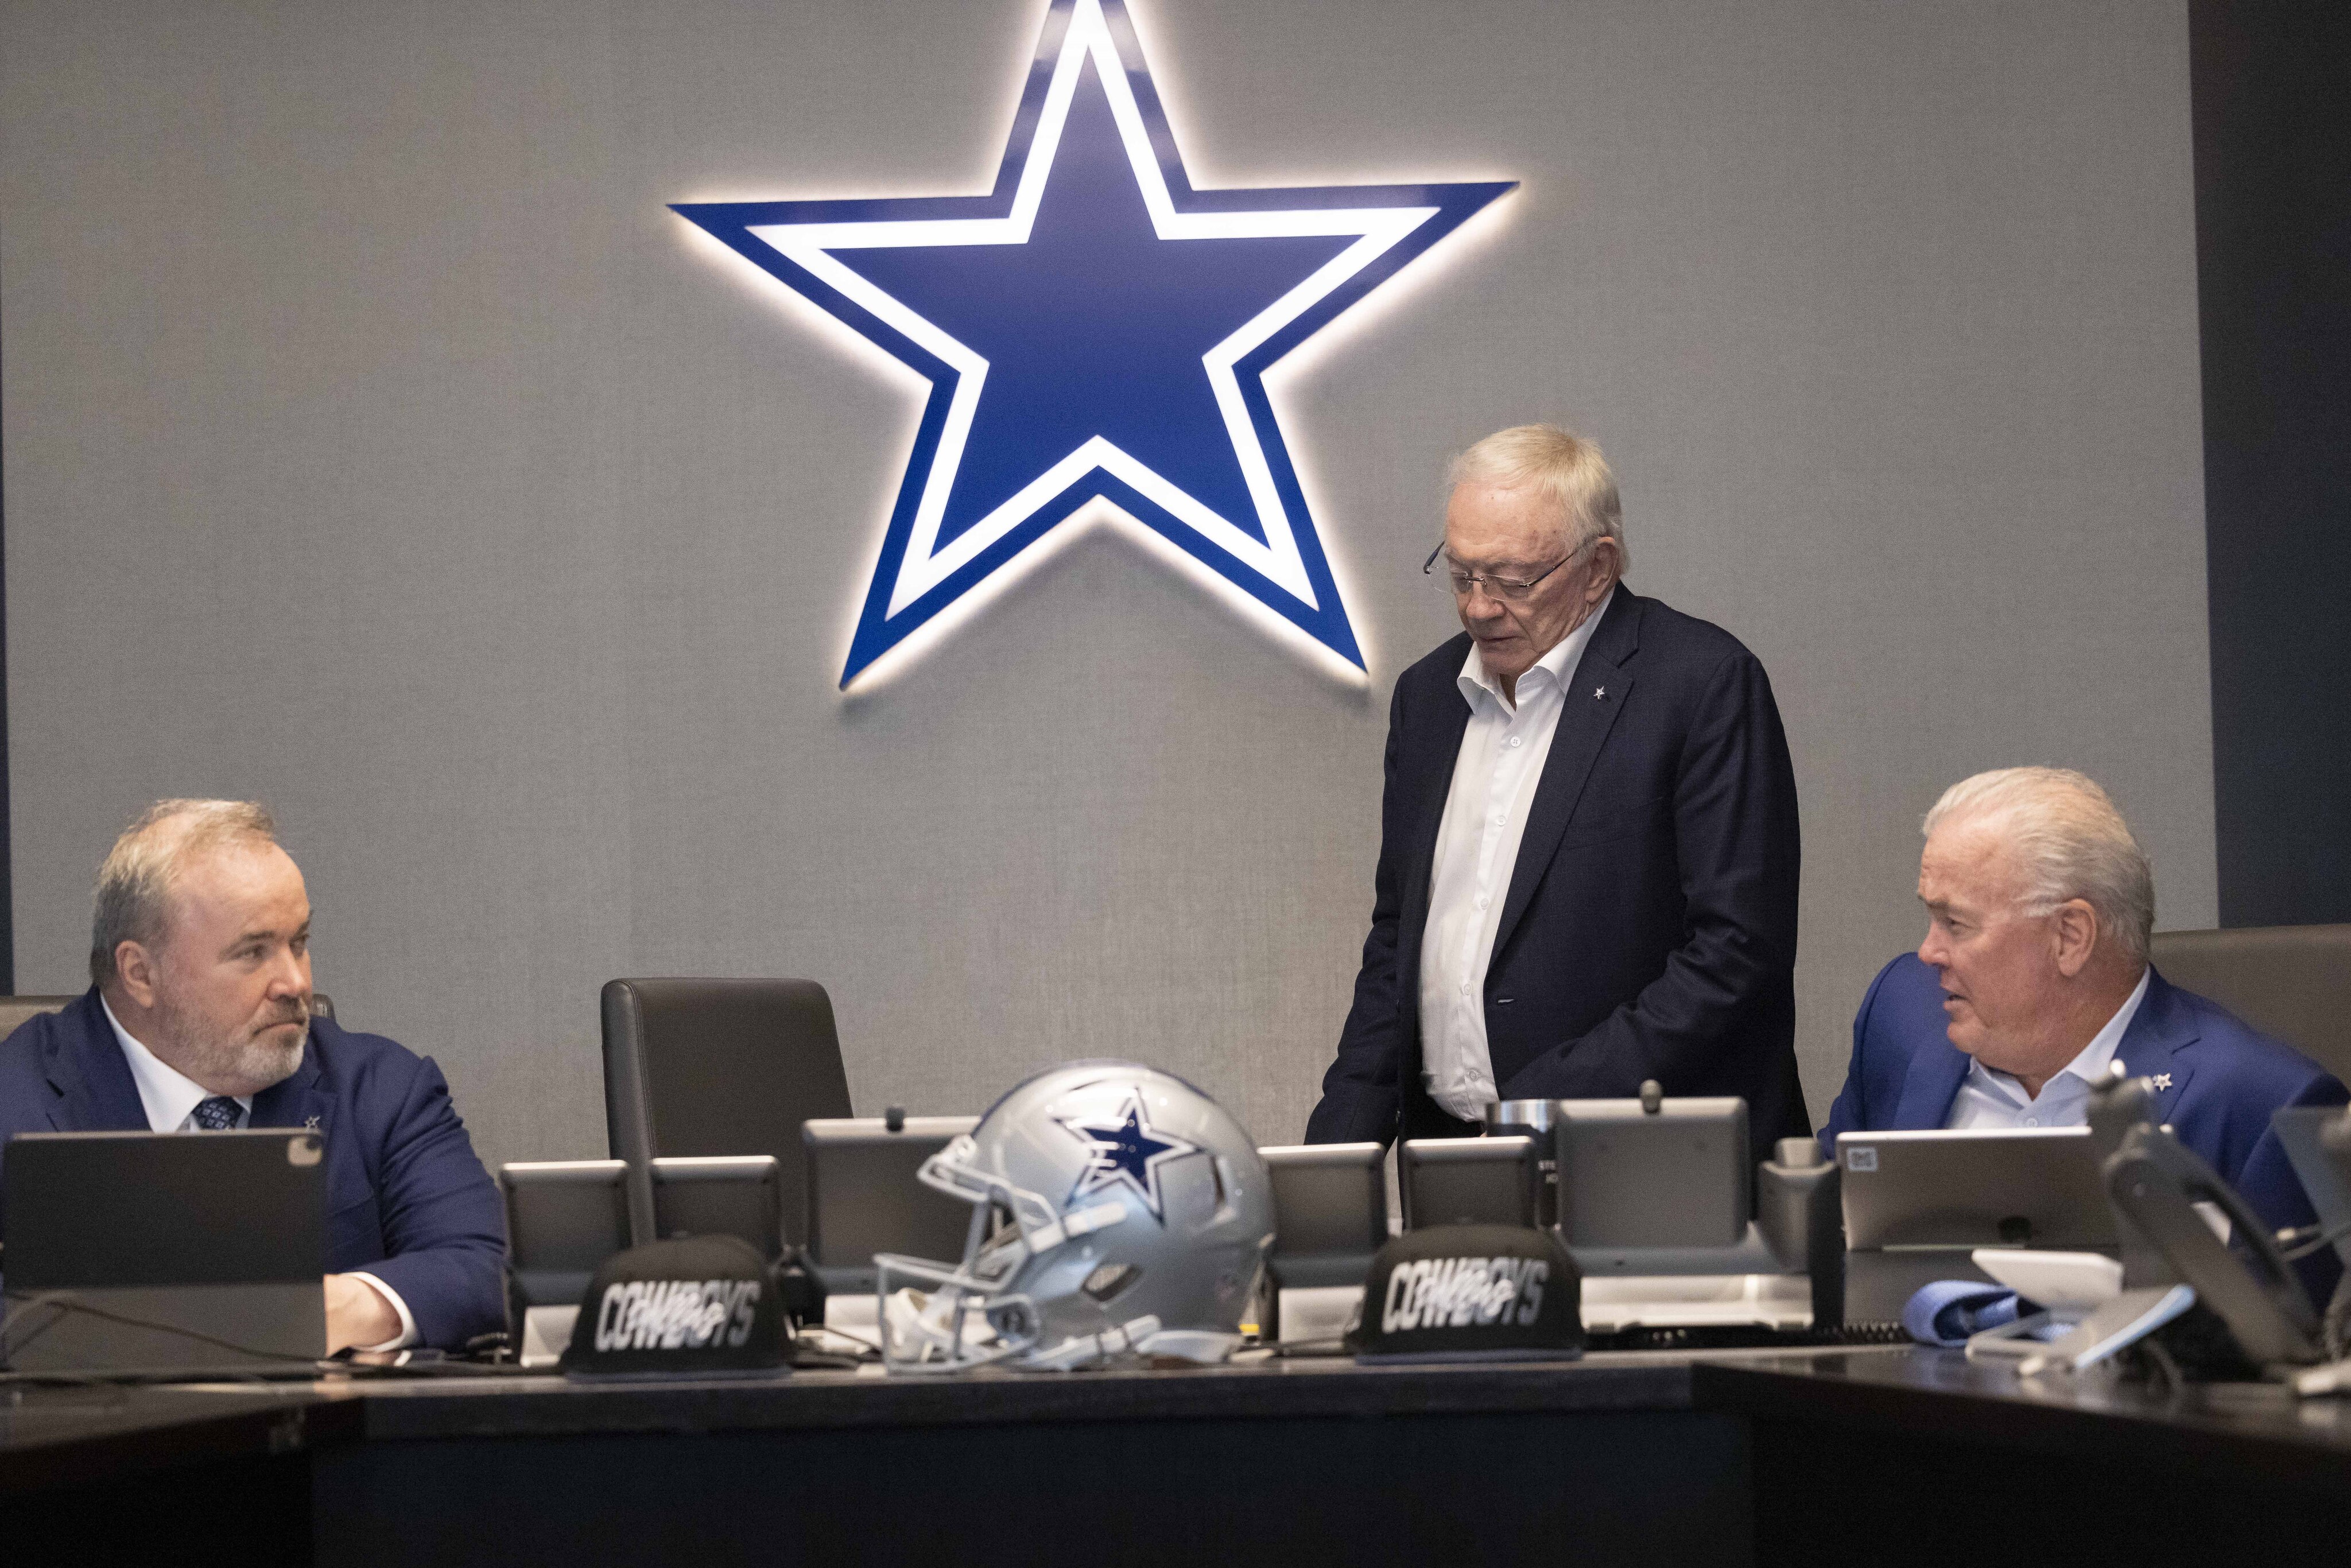 Cowboys Draft results 2022: Dallas selects Tyler Smith from Tulsa with 24th  pick - Blogging The Boys